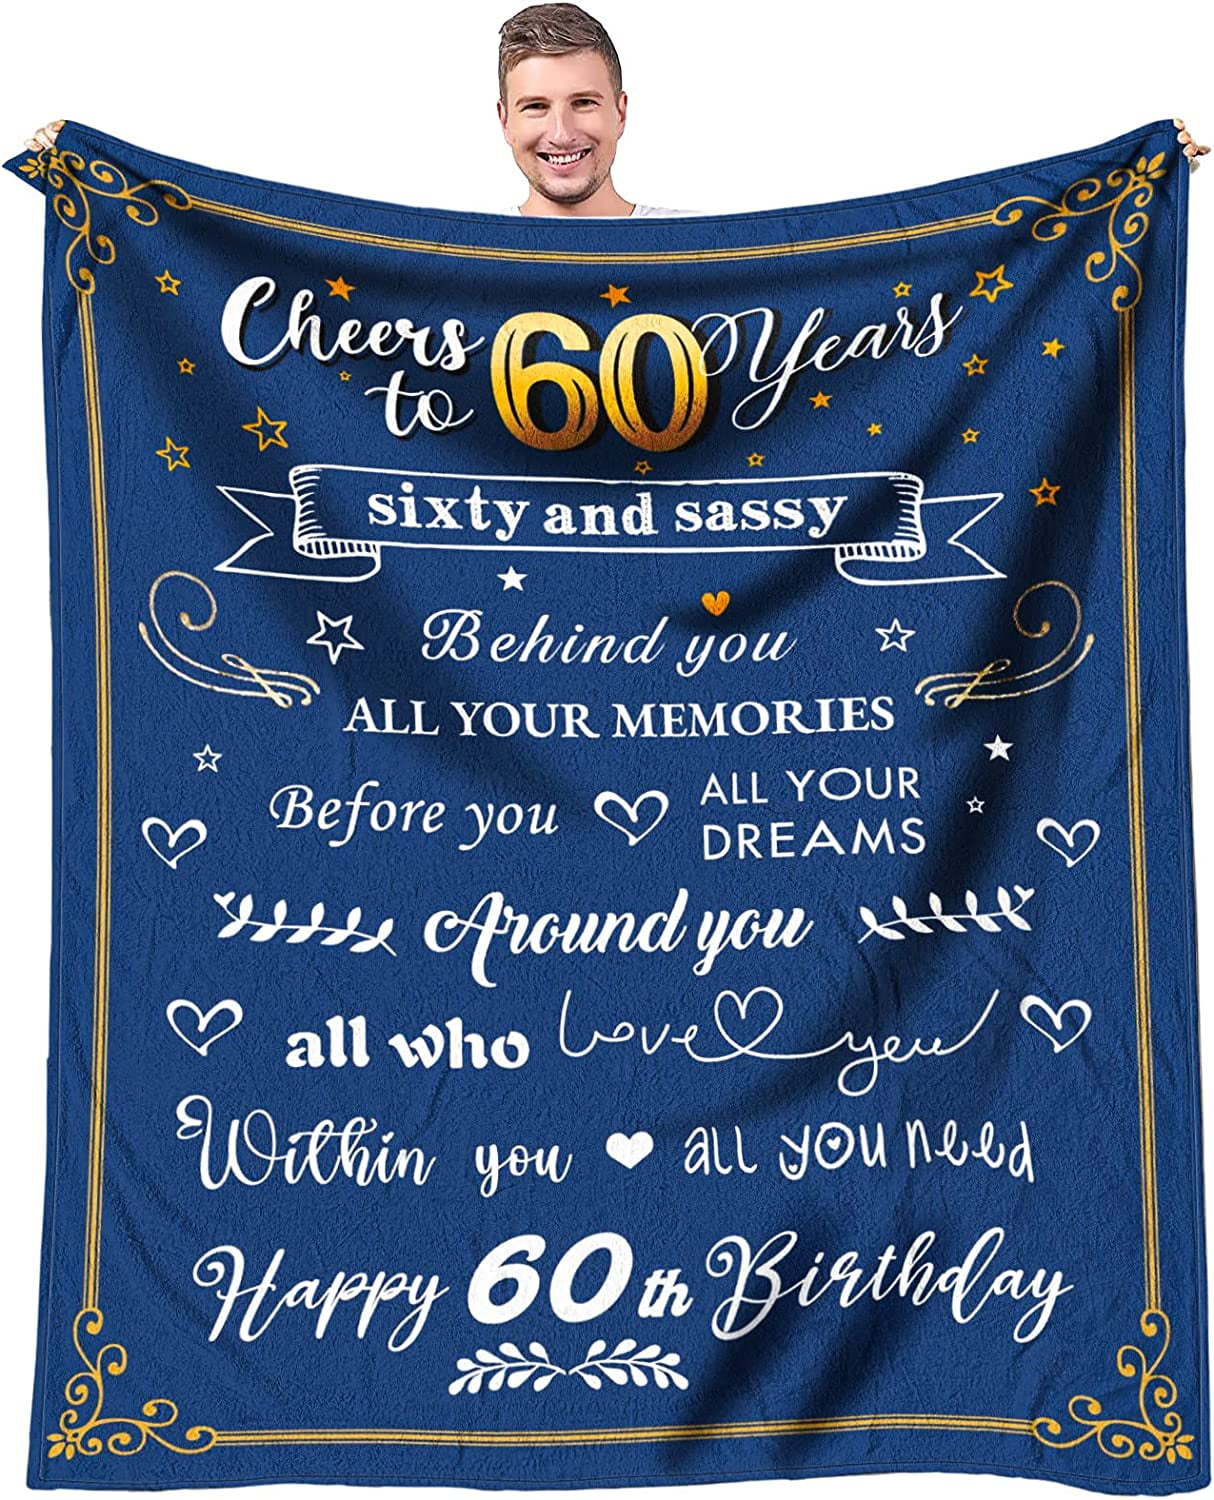 60th Birthday Gift for Men Blanket - Happy 60 Birthday Gifts for Dad or Husband - 1962 Mens Birthday Gift Ideas - Gifts for 60 Year Old Man - Cozy & Soft